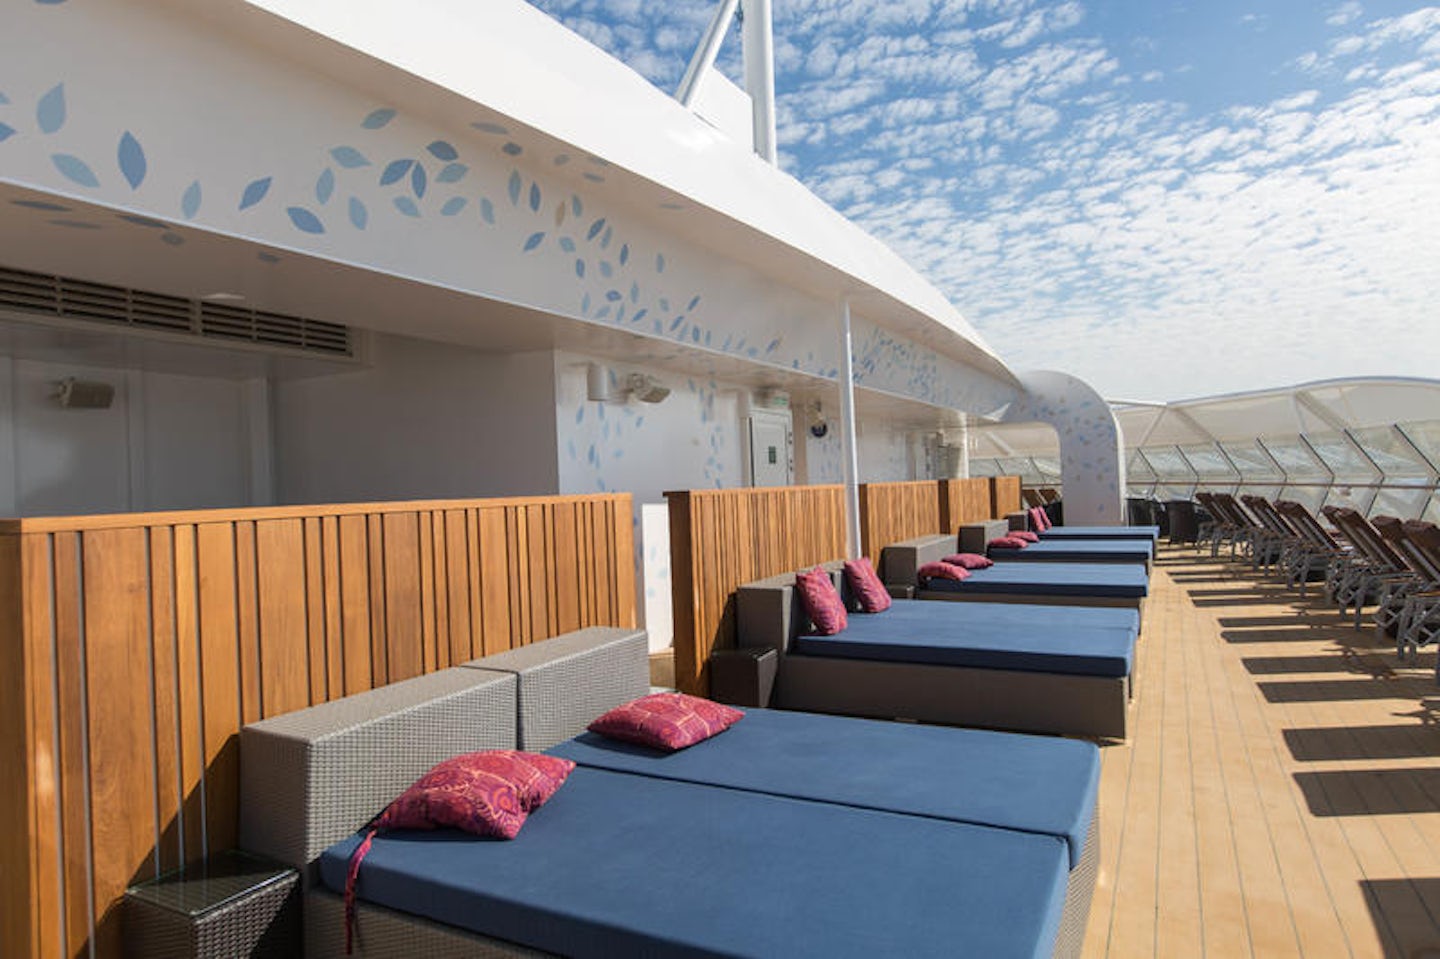 The Suite Sun Deck on Harmony of the Seas